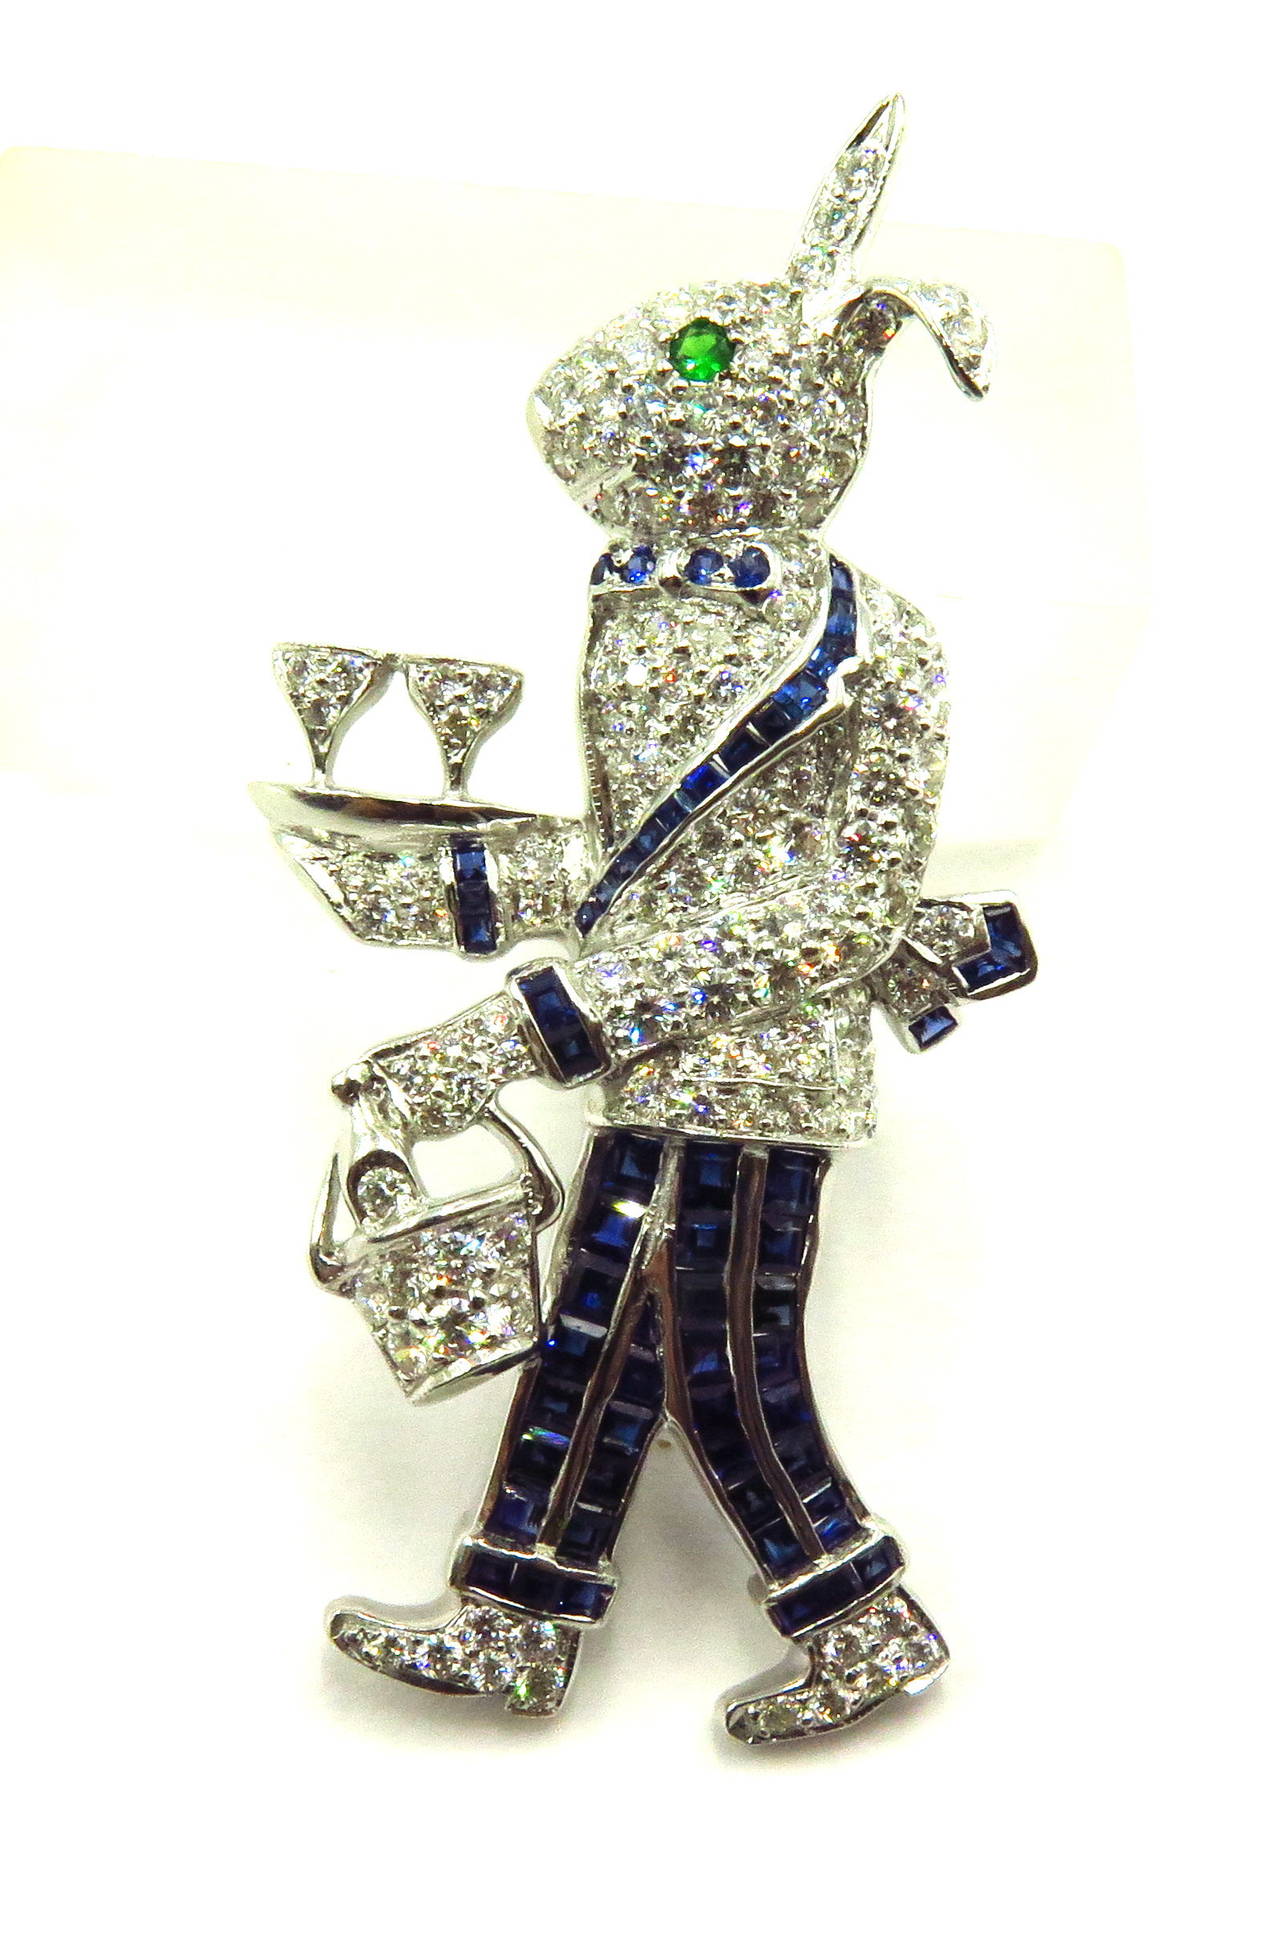 This 18k rabbit pin is the smaller of 2 large pins available. (Other pin also available/listed). They can be bought individually or as a pair. This tall bow tied rabbit holding his wine bottle inside the basket in one hand and a refreshing pair of